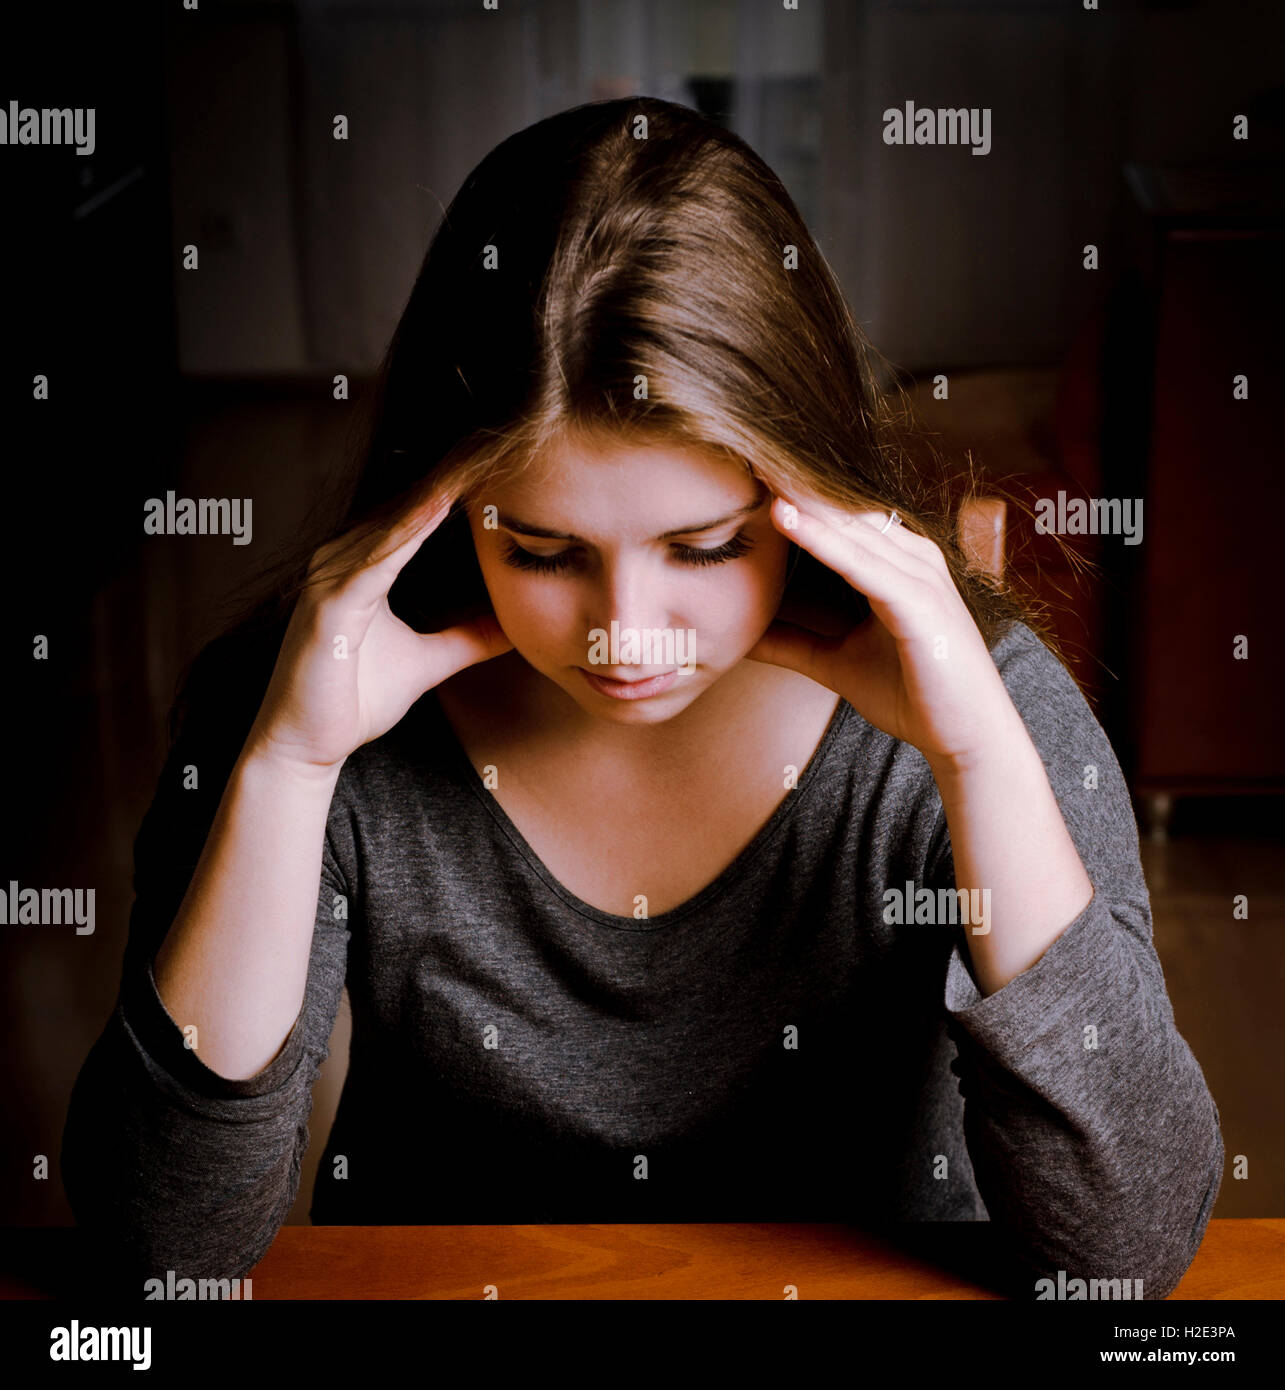 girl with an headache or depressed Stock Photo